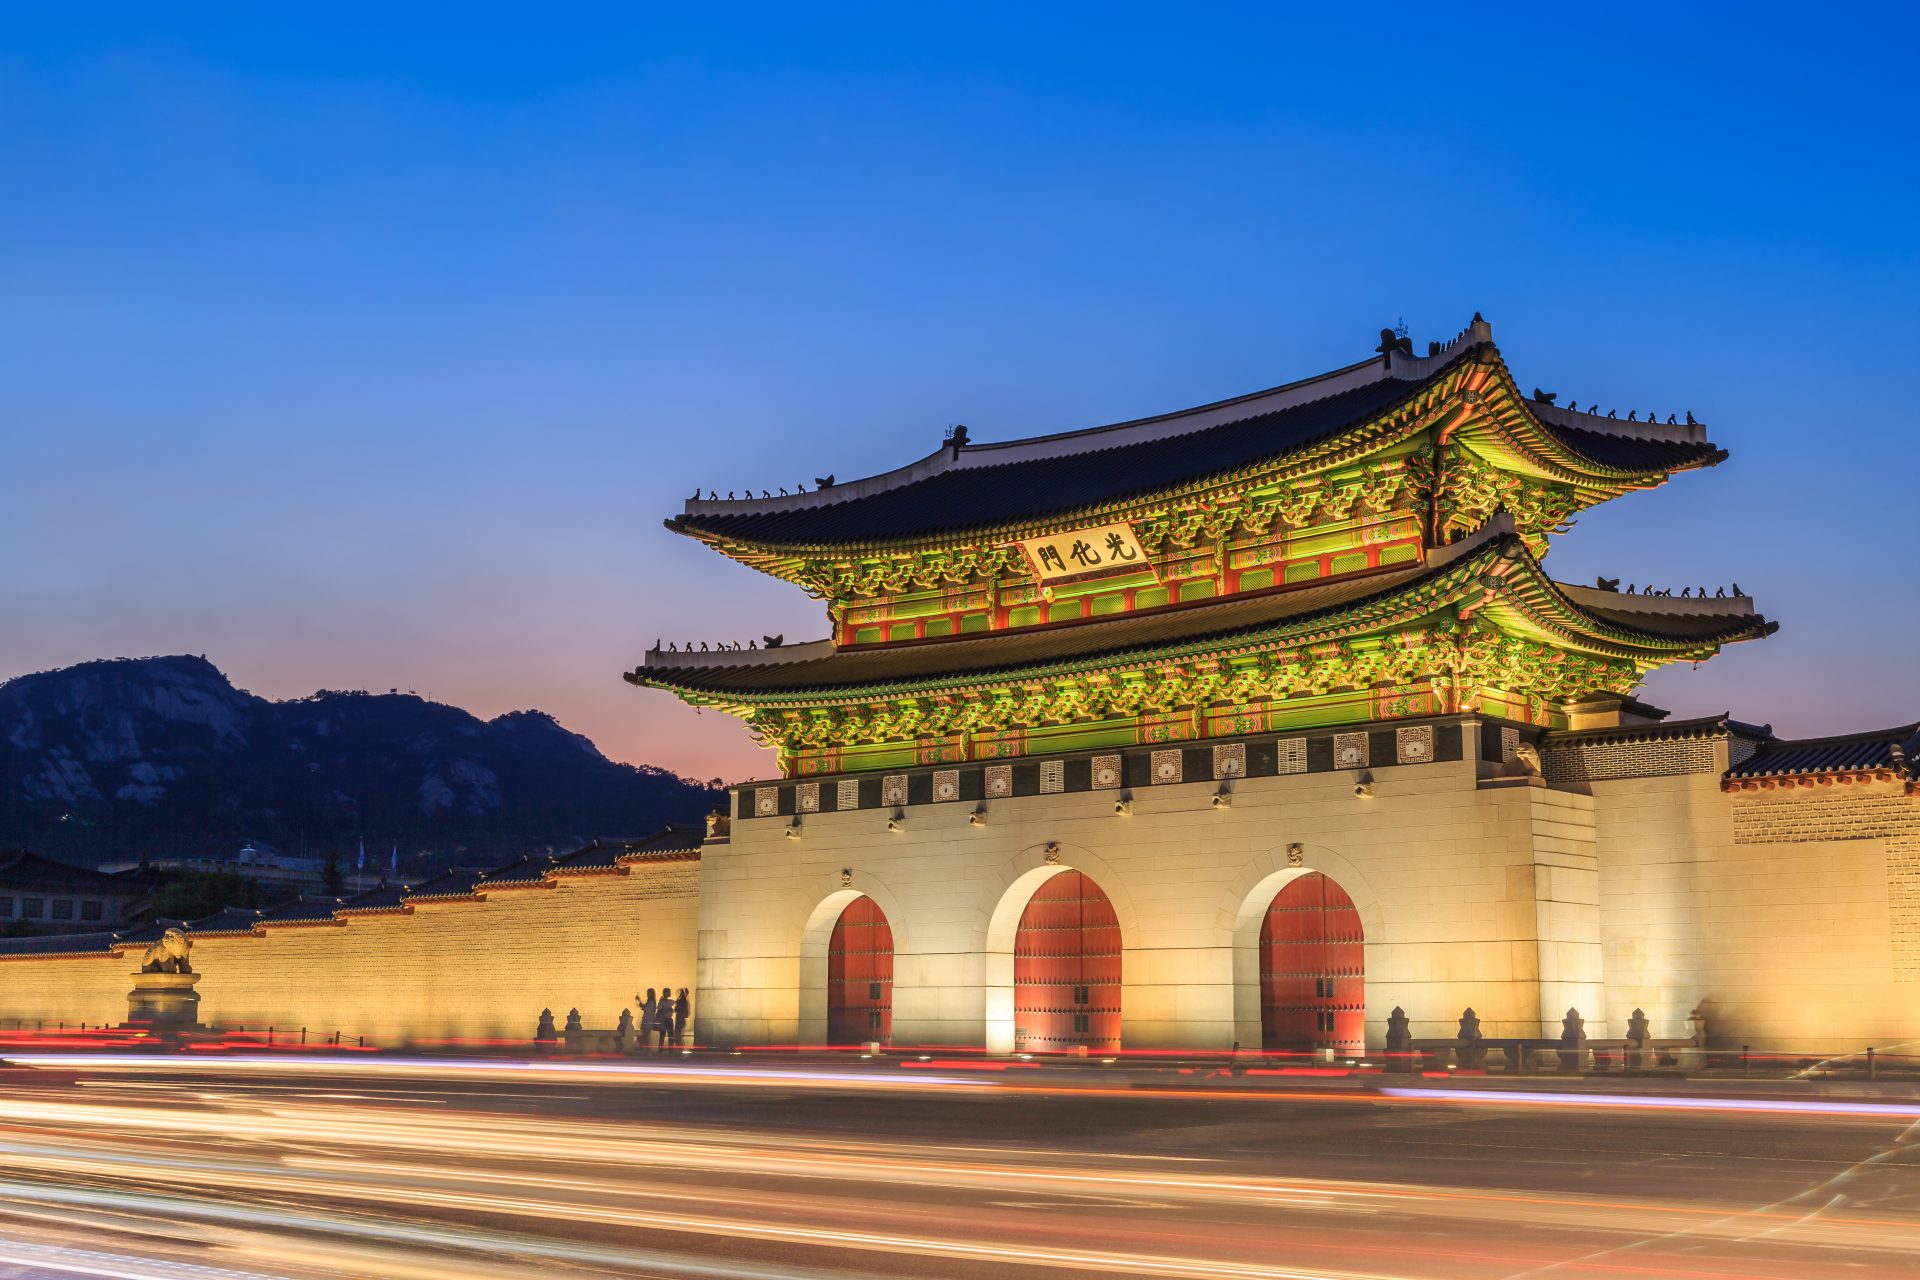 <p>Gyeongbokgung Palace was built in 1395 by Lee Seong-gye, the founder of the Joseon Dynasty. It is the largest of the five ancient palaces in Seoul, with national treasures and other valuable buildings dotted around the approximately 120,000 Pyong grounds.</p> <p><a href="https://www.msn.com/en-us/channel/source/Showbizz%20Daily%20English/sr-vid-w8hcuhvu3f8qr5wn5rk8xhsu5x8irqrgtxcypg4uxvn7tq9vkkfa?cvid=cddbc5c4fc9748a196a59c4cb5f3d12a&ei=7" rel="noopener">Follow Showbizz Daily to see the best photo galleries every day</a></p>